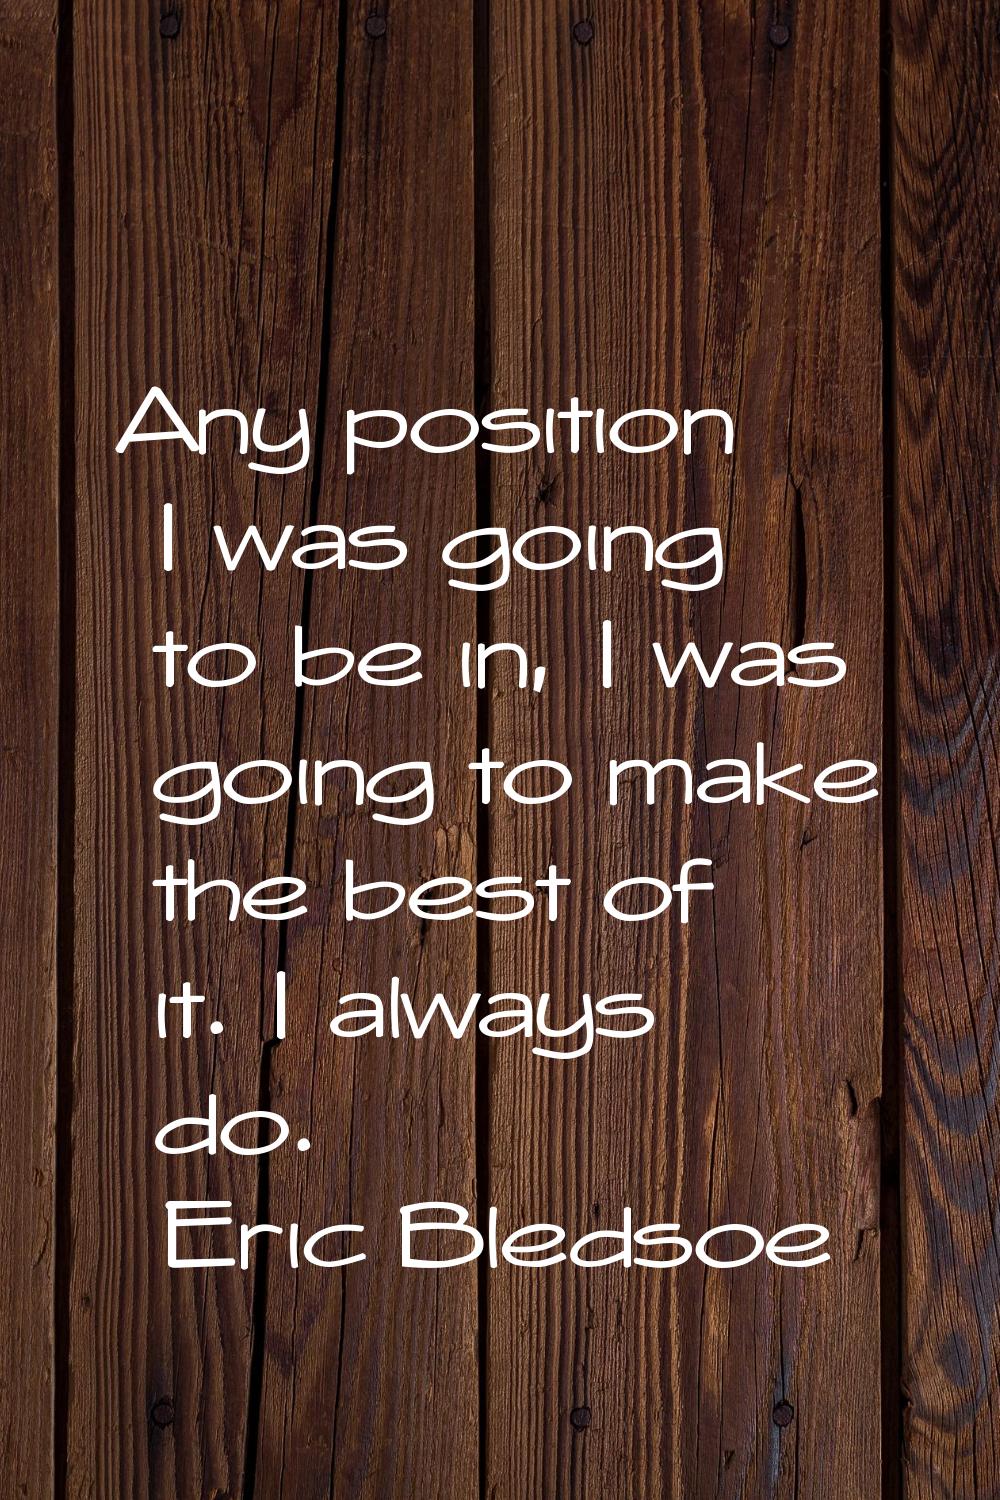 Any position I was going to be in, I was going to make the best of it. I always do.